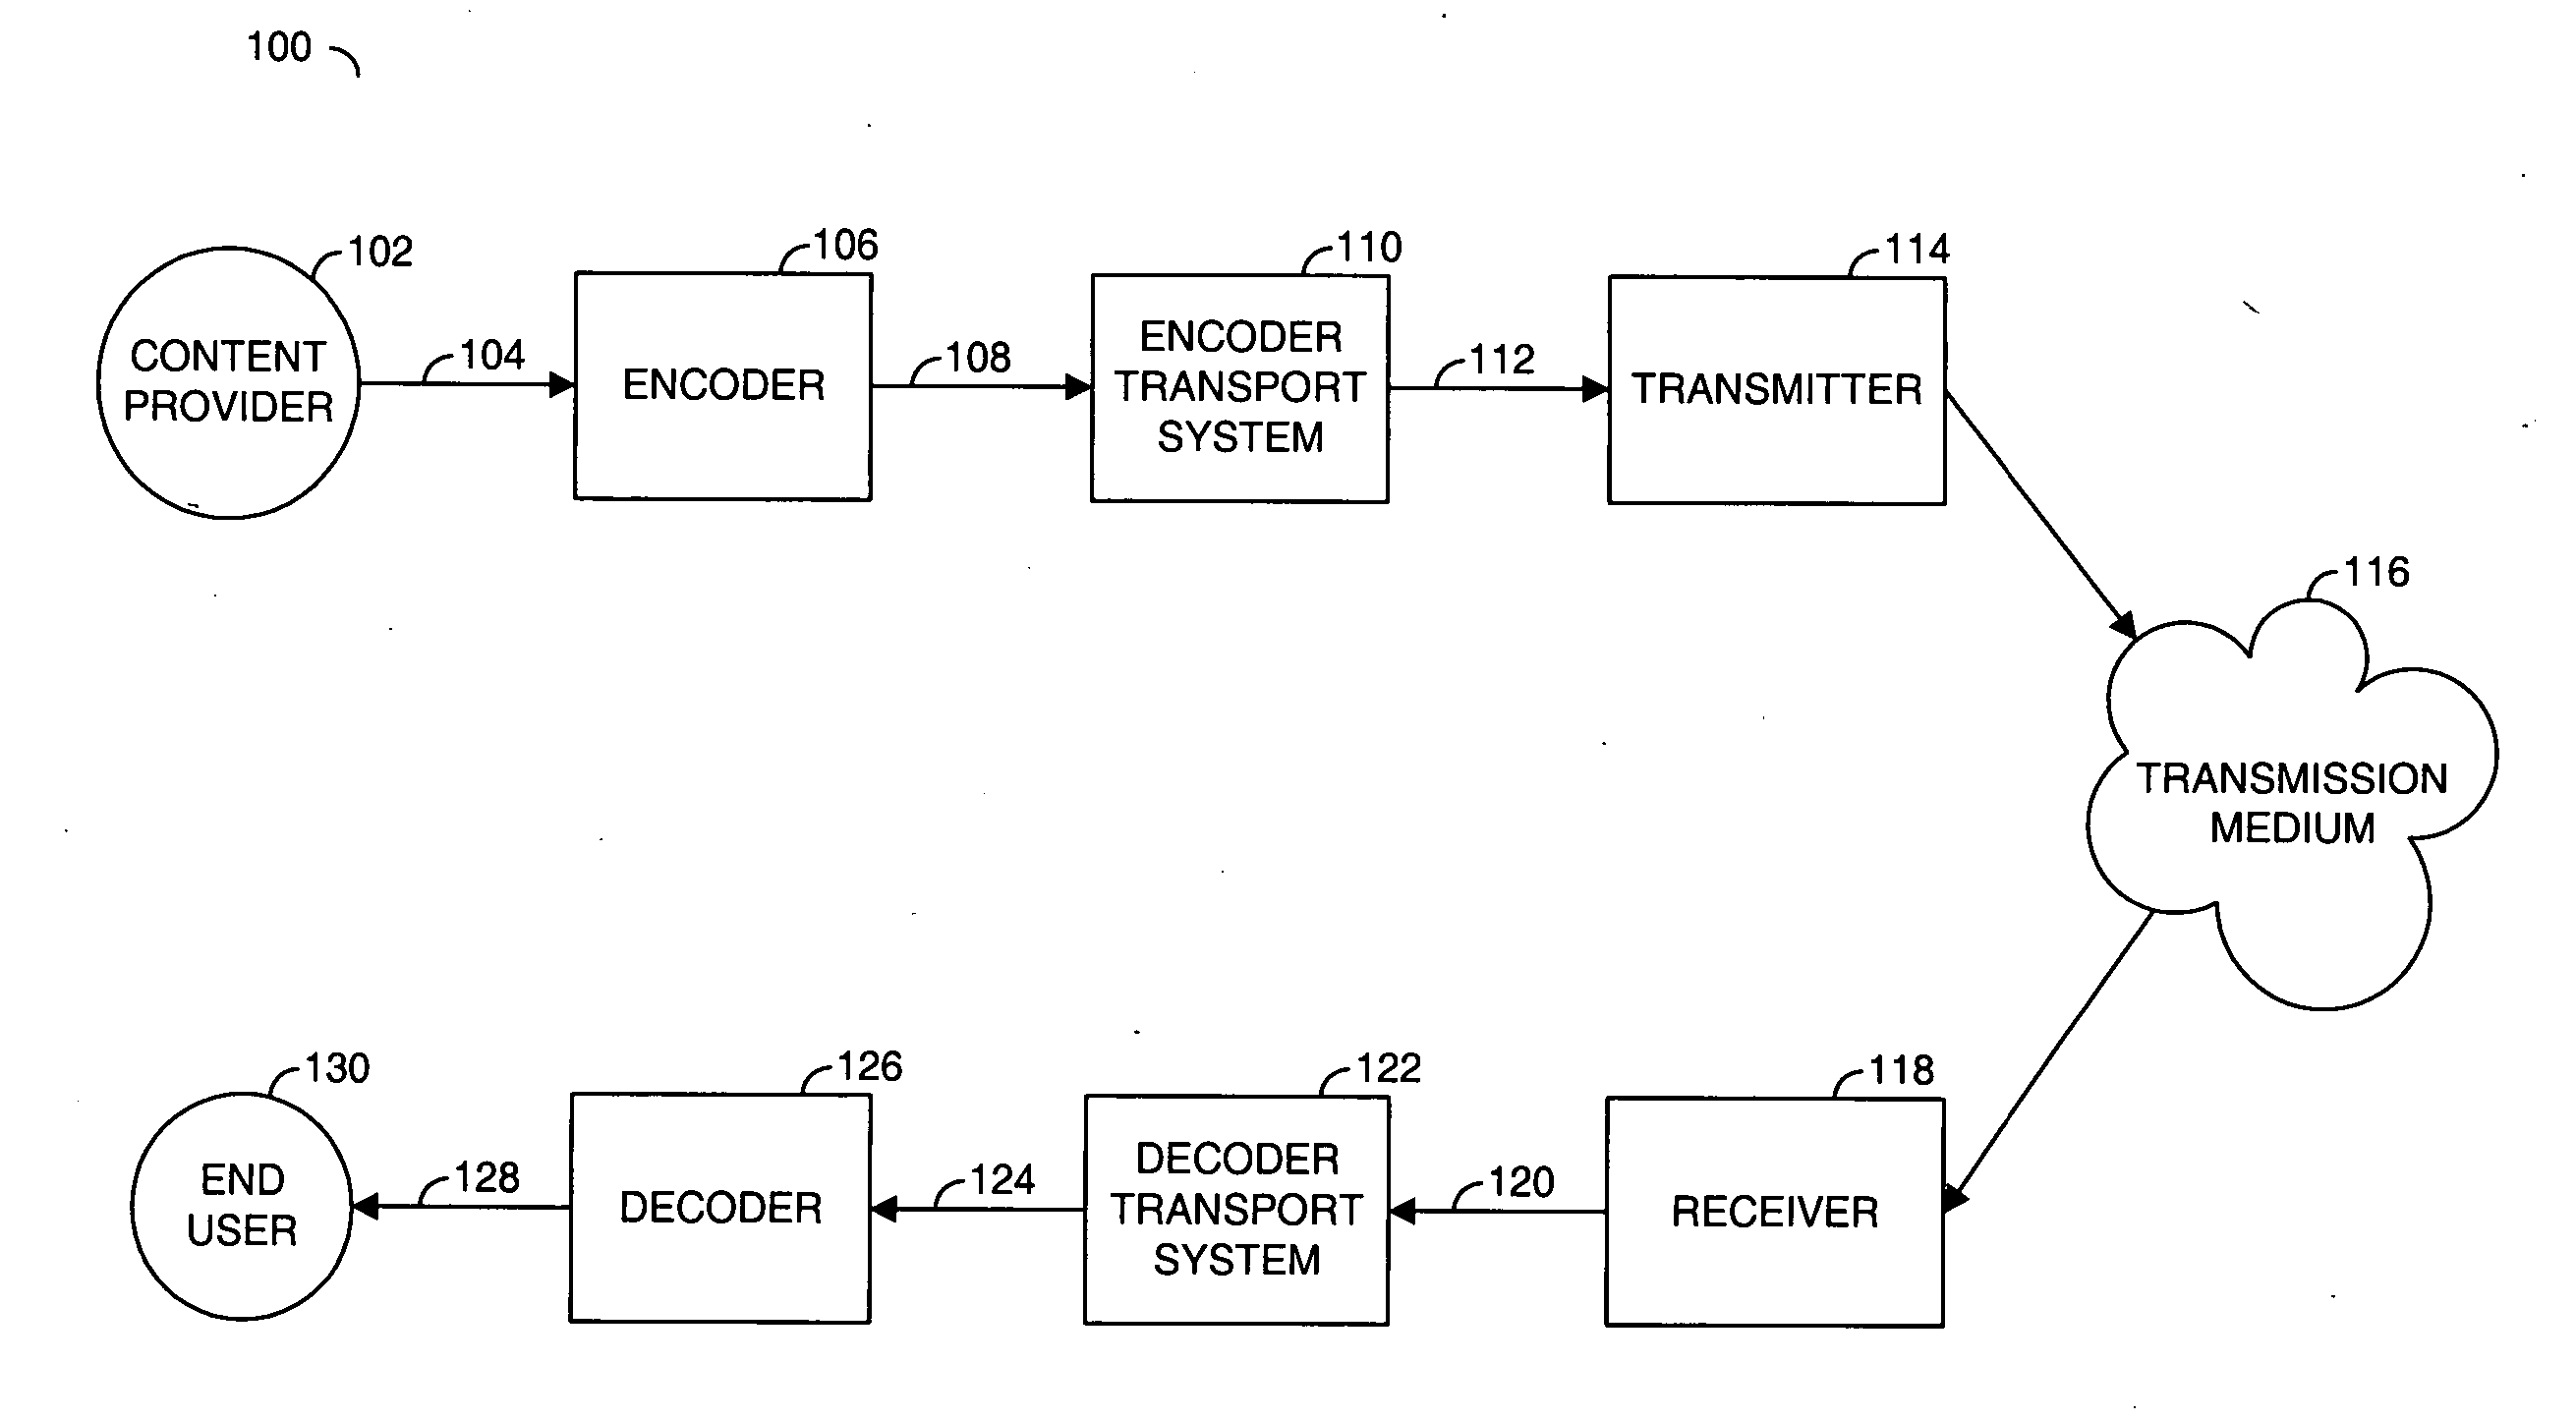 Method for specification of quantized coefficient limit